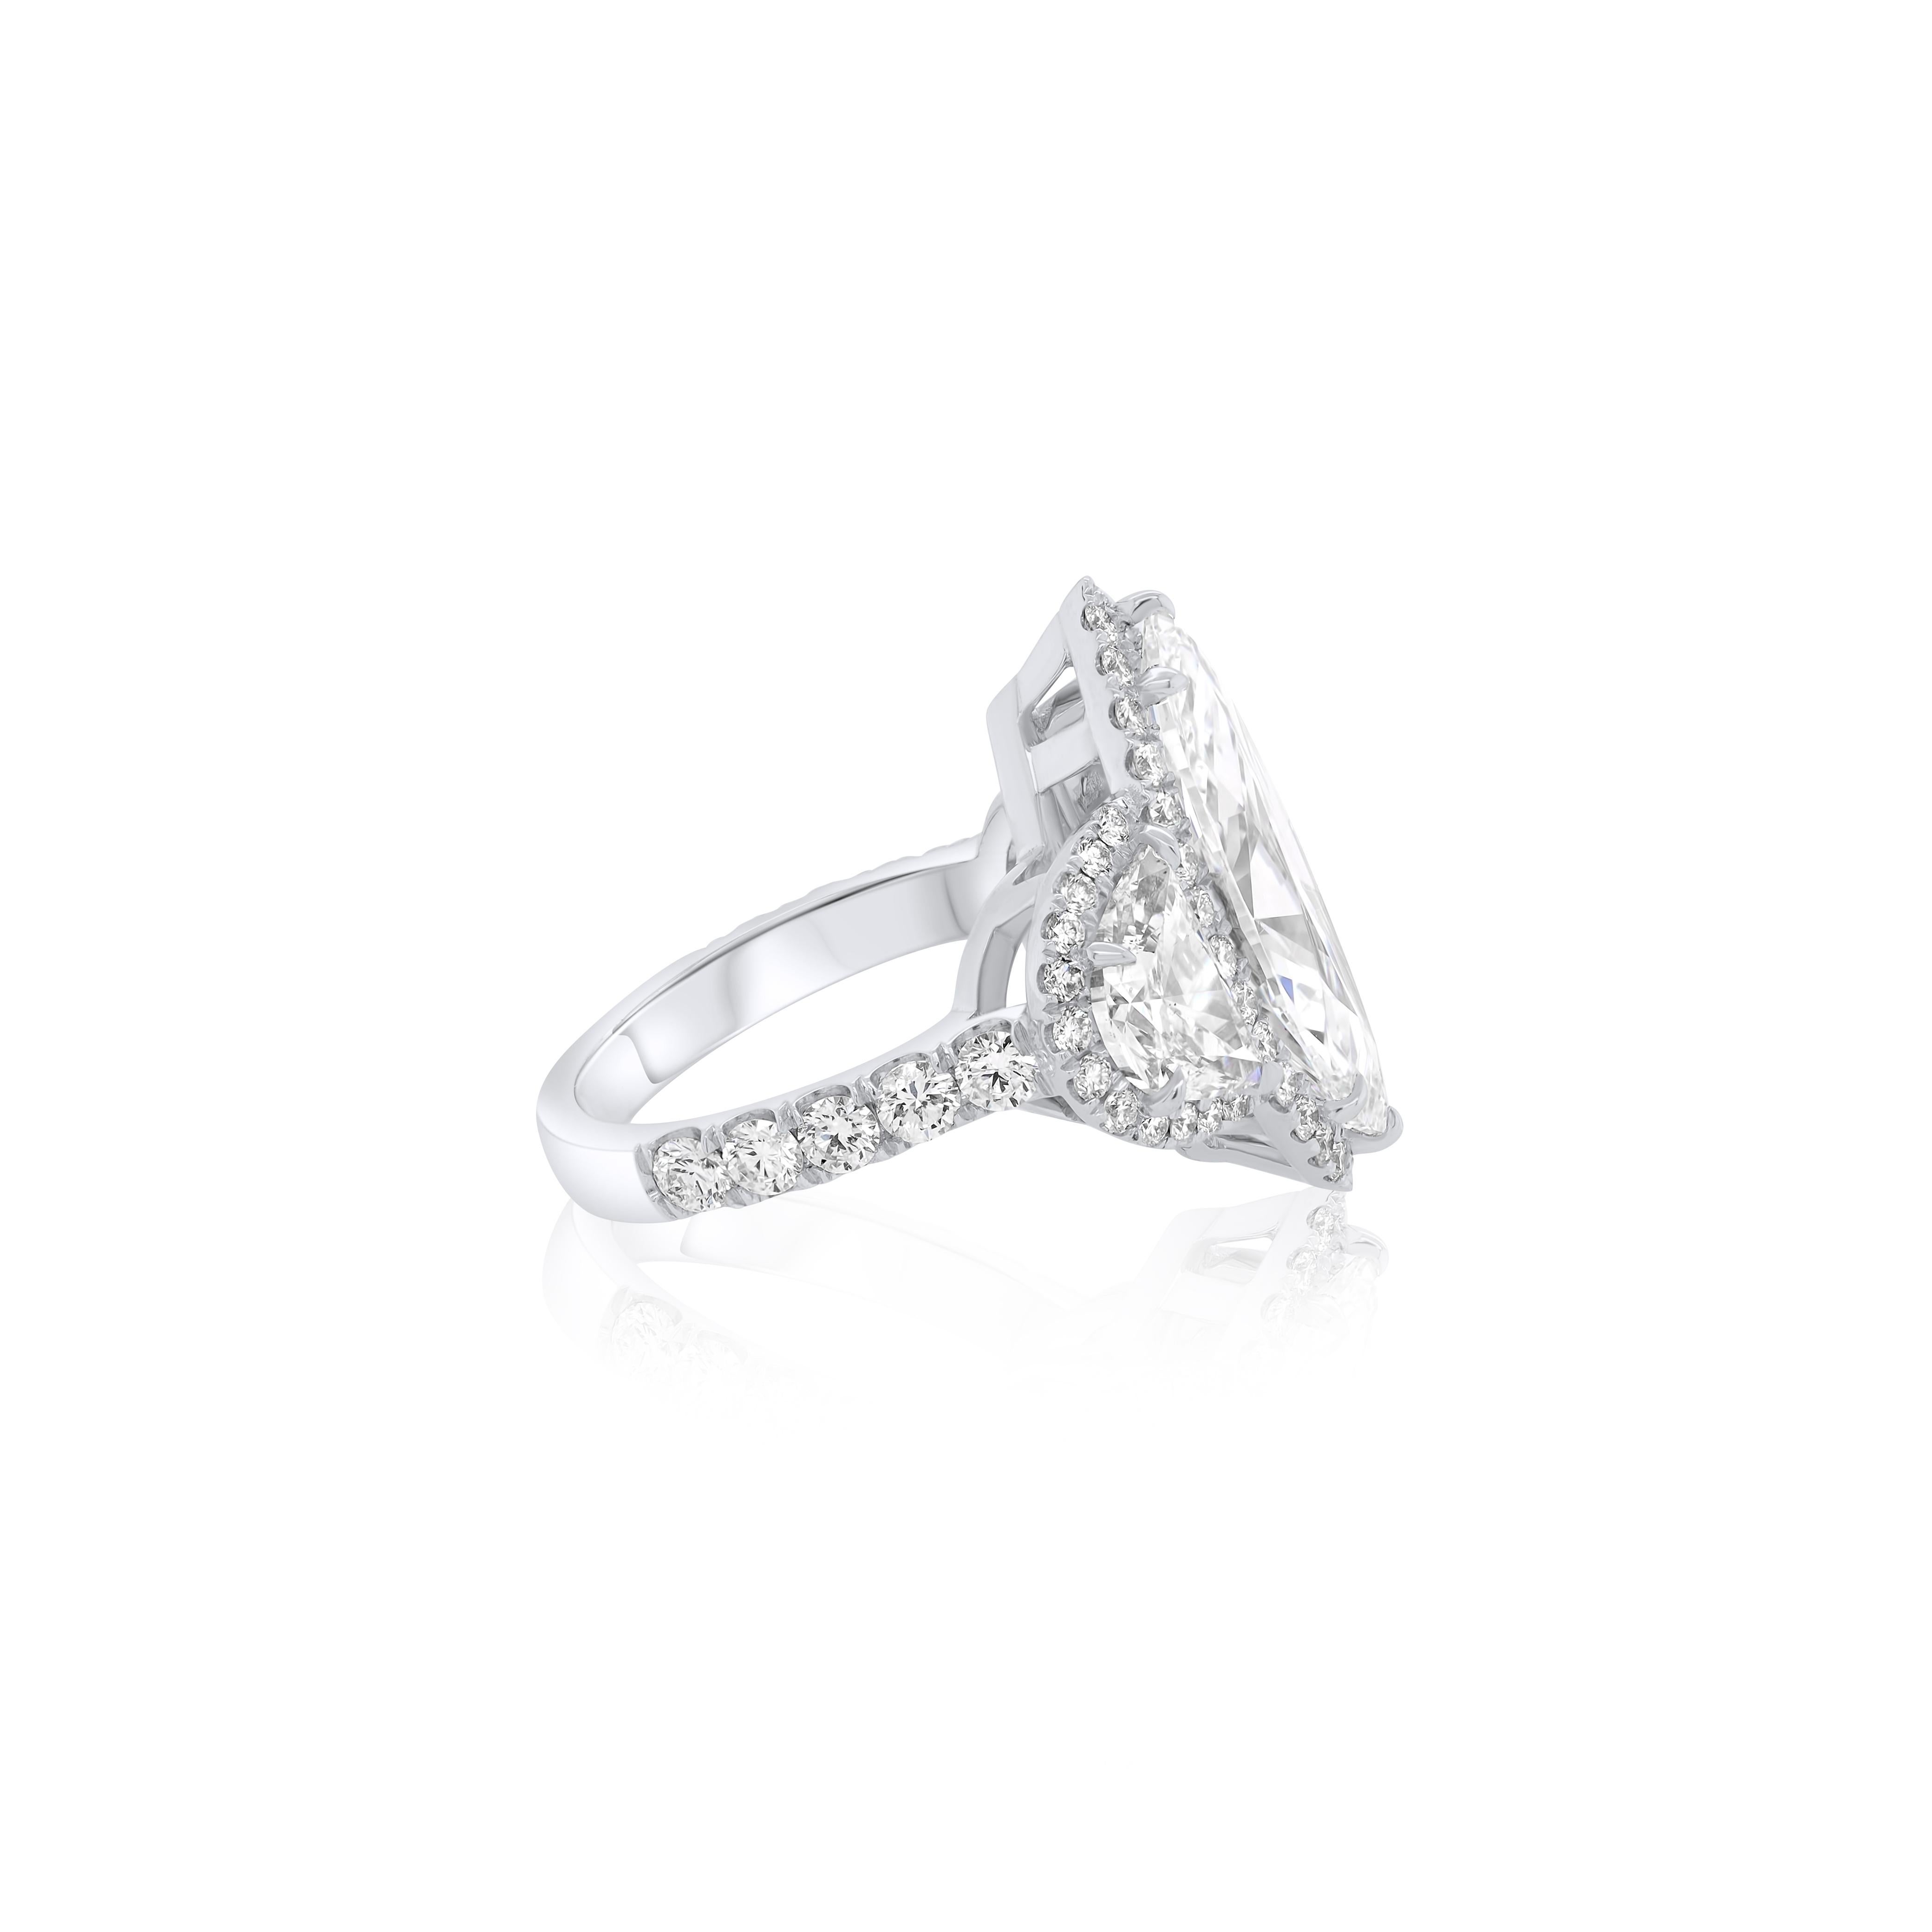 Marquise Cut Diana M. 5.65 Carat E Color VS2 in Clarity Marquise Diamond Ring For Sale